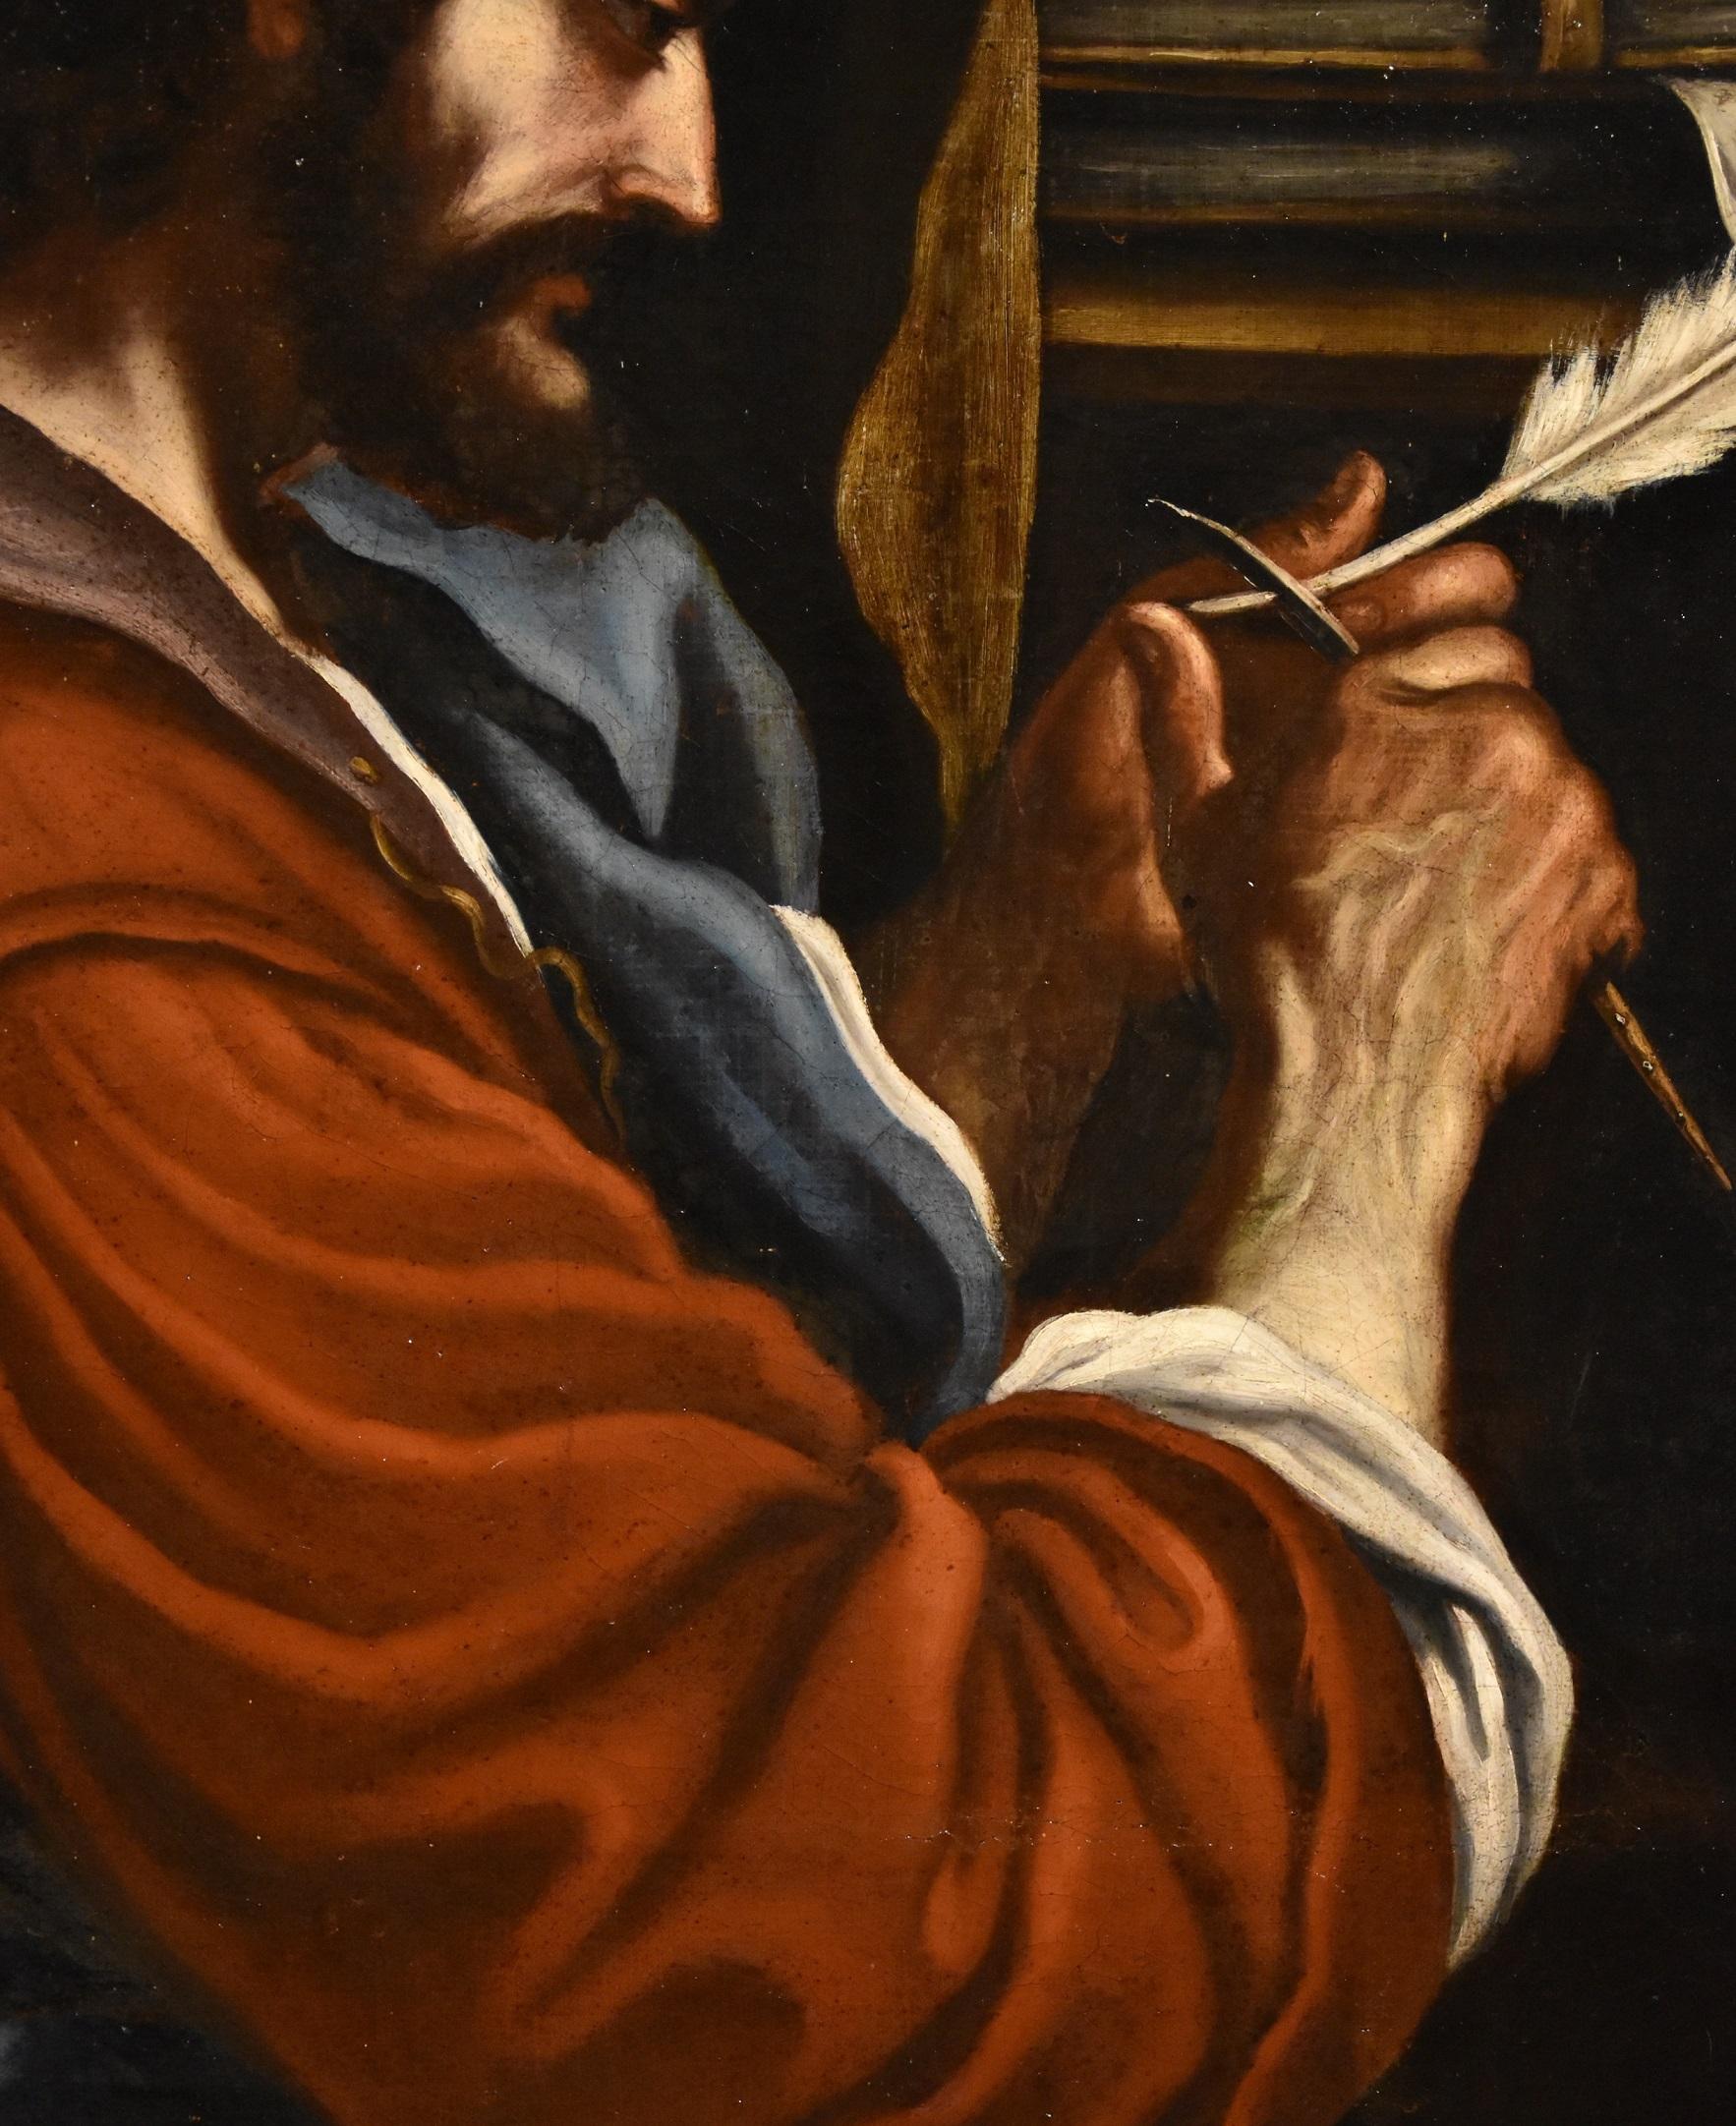 Saint Mark Evangelist Guercino Paint Oil on canvas Old master 17th Century Italy - Old Masters Painting by Giovanni Francesco Barbieri, known as Il Guercino (Cento, 1591 - Bologna, 1666)